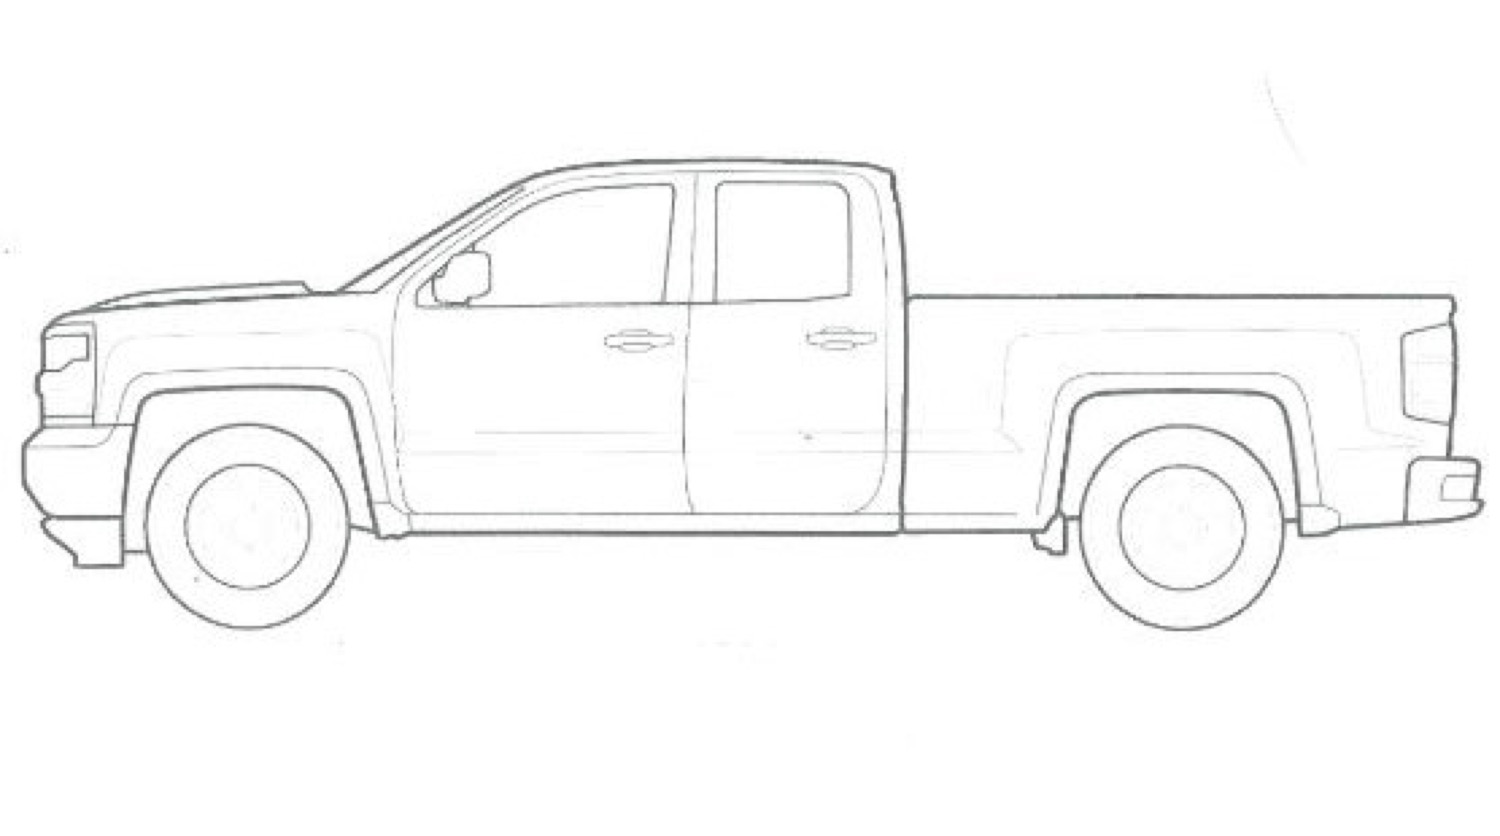 2019 Chevrolet Coloring Pages Are Fun For The Family | GM ...